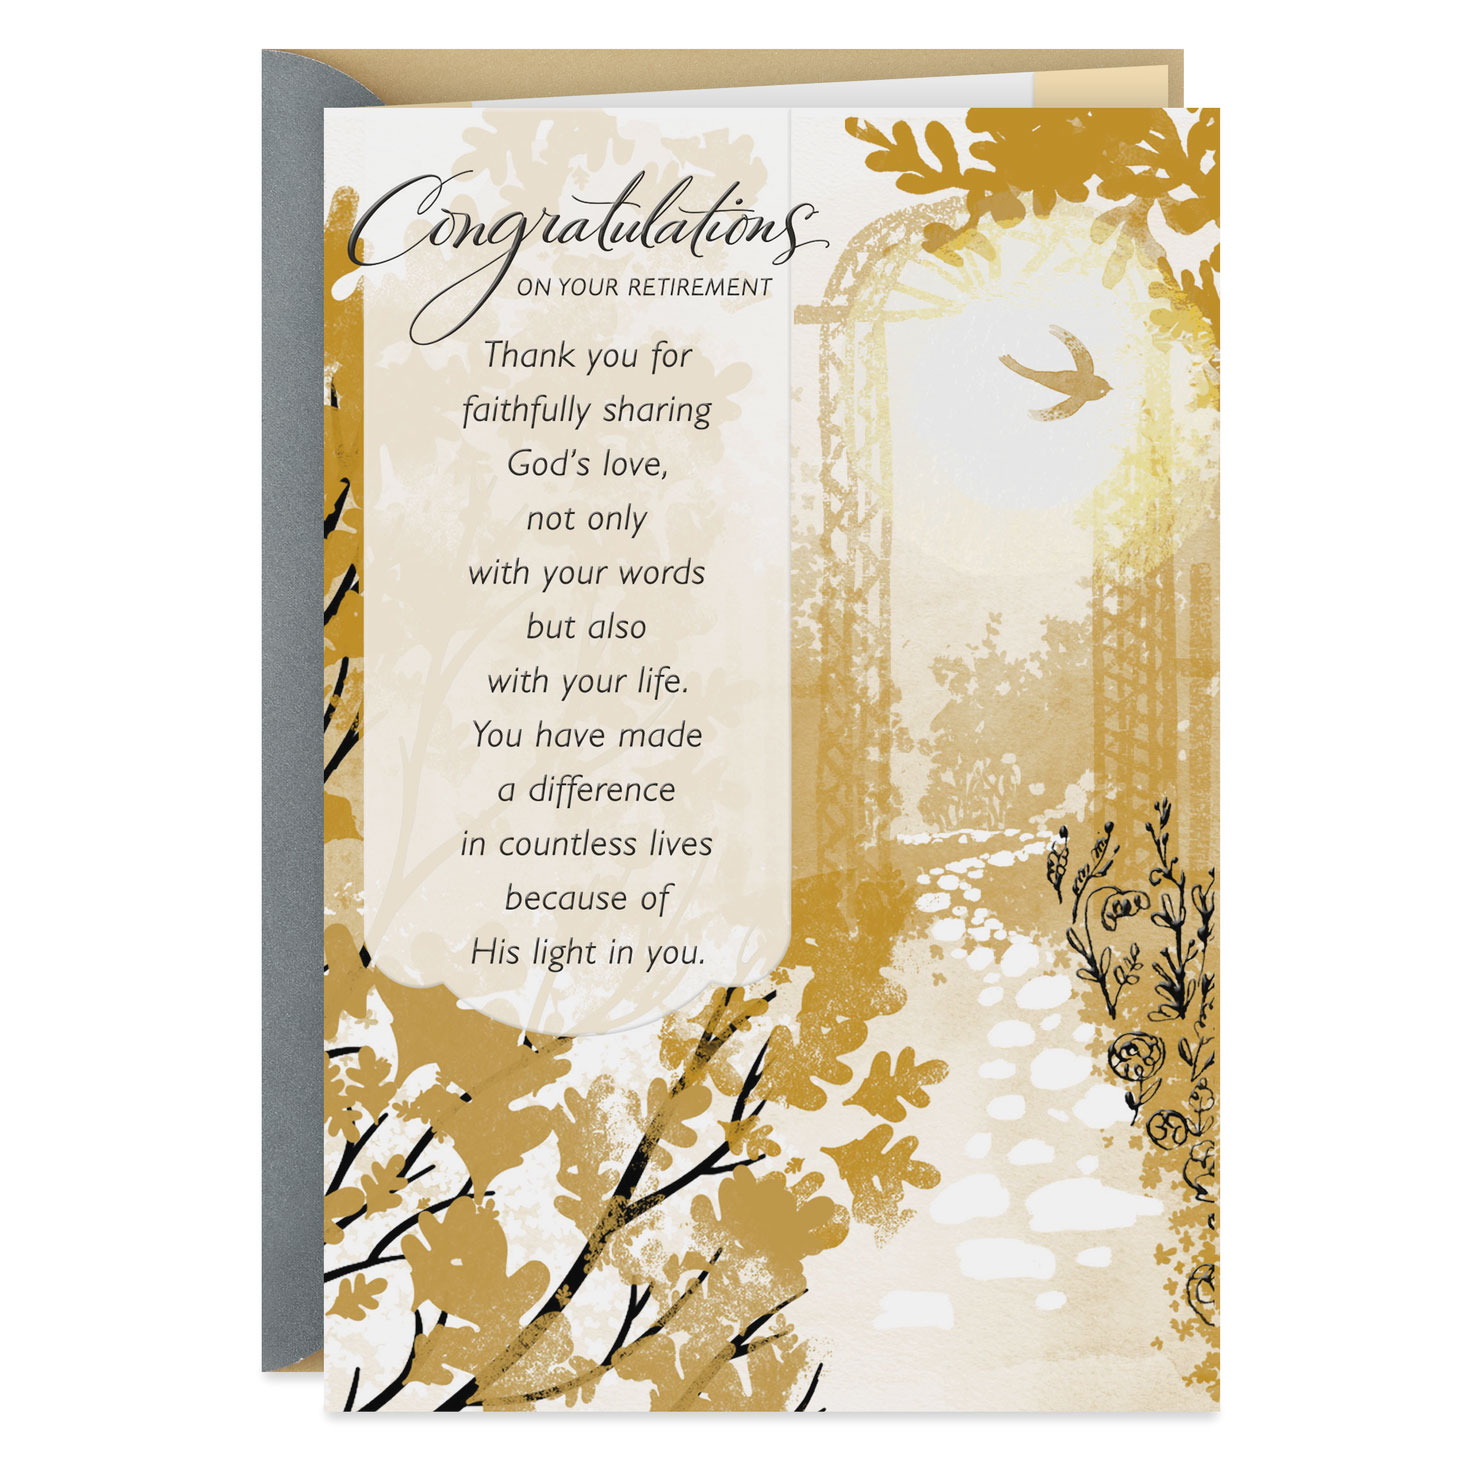 Made a Difference Religious Retirement Card for Pastor - Greeting Cards - Hallmark